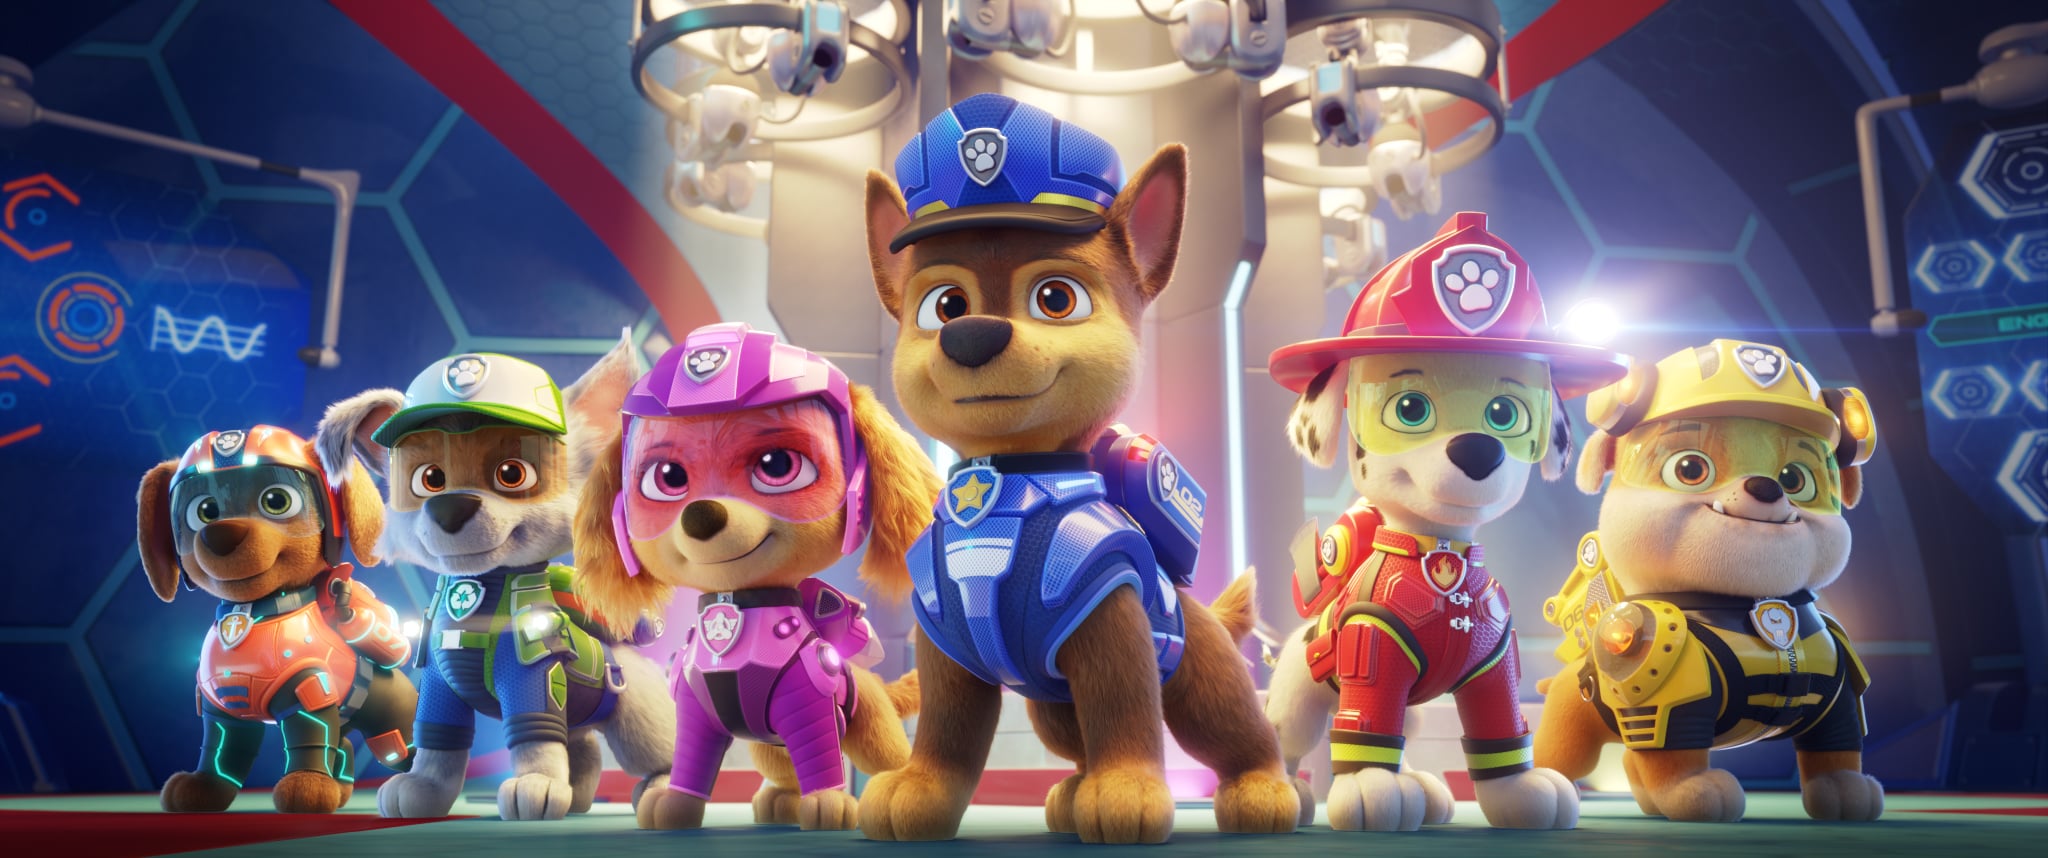 L-R: Zuma (voiced by Shayle Simons), Rocky (voiced by Callum Shoniker), Skye (voiced by Lilly Bartlam), Chase (voiced by Iain Armitage), Marshall (voiced by Kingsley Marshall), and Rubble (voiced by Keegan Hedley) in PAW PATROL: THE MOVIE from Paramount Pictures. Photo Credit: Courtesy of Spin Master.